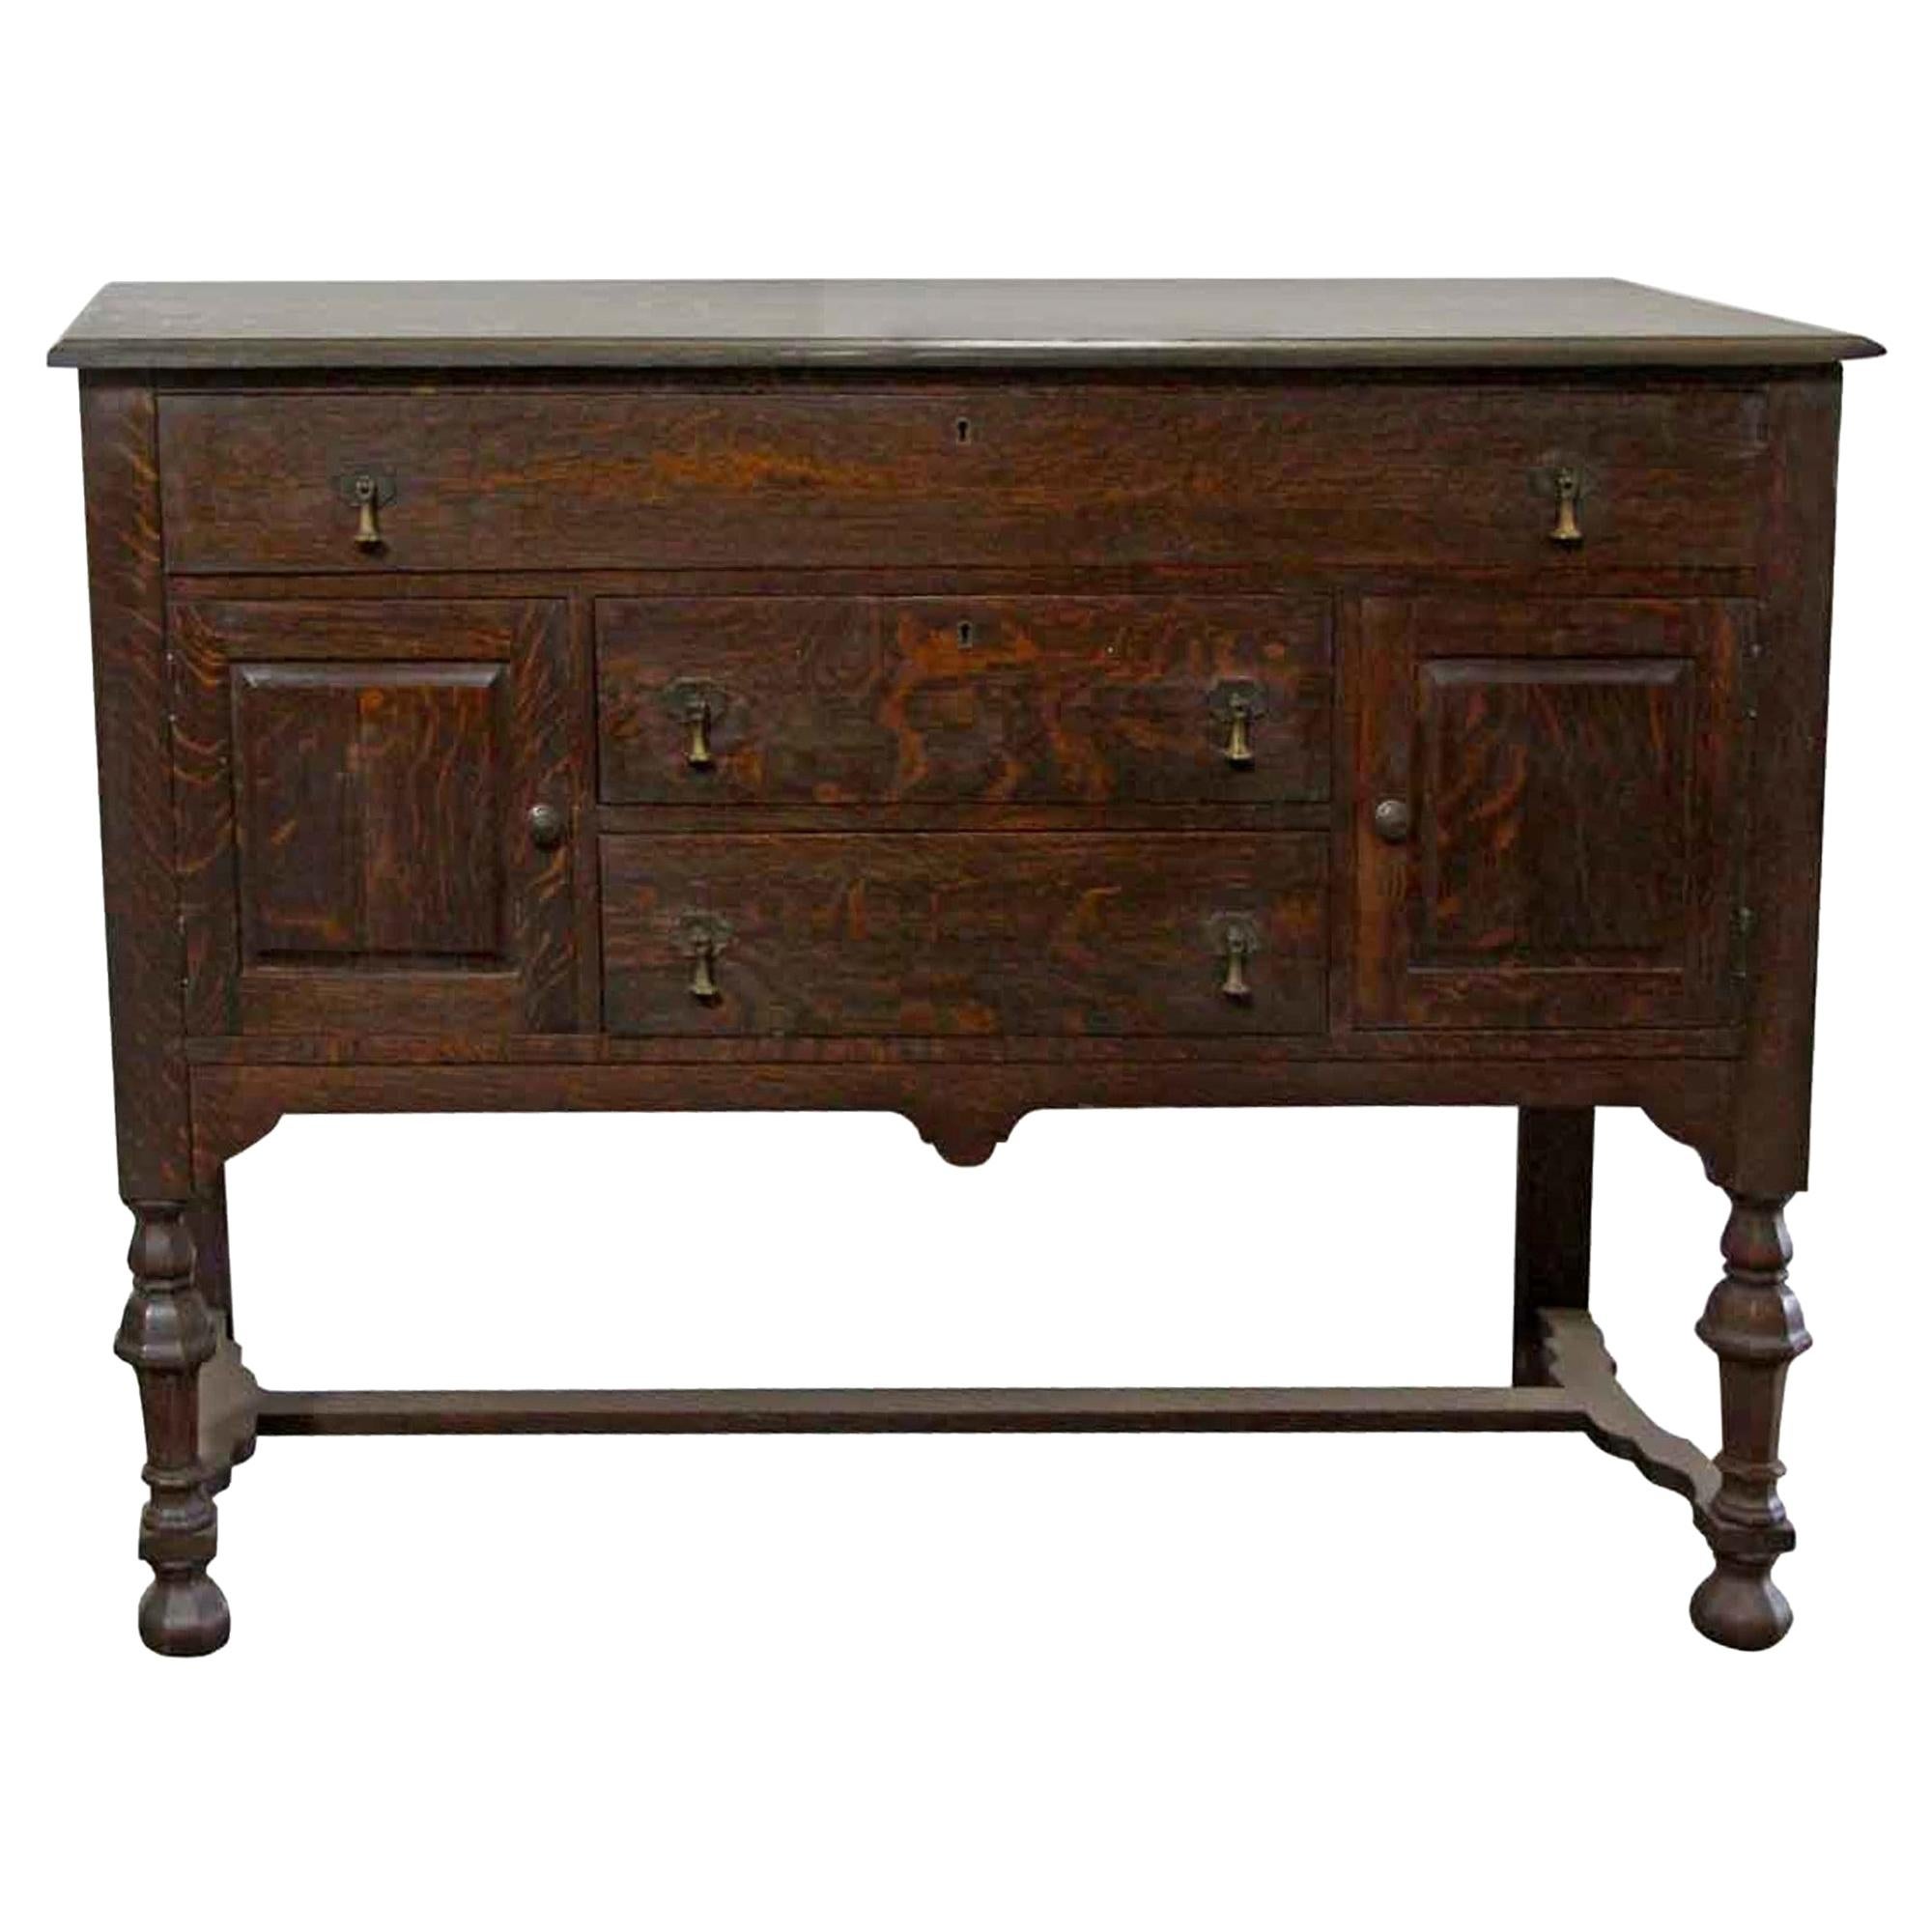 1905 Arts & Crafts Tiger Oak Sideboard with 3 Drawers and 2 Cubicles